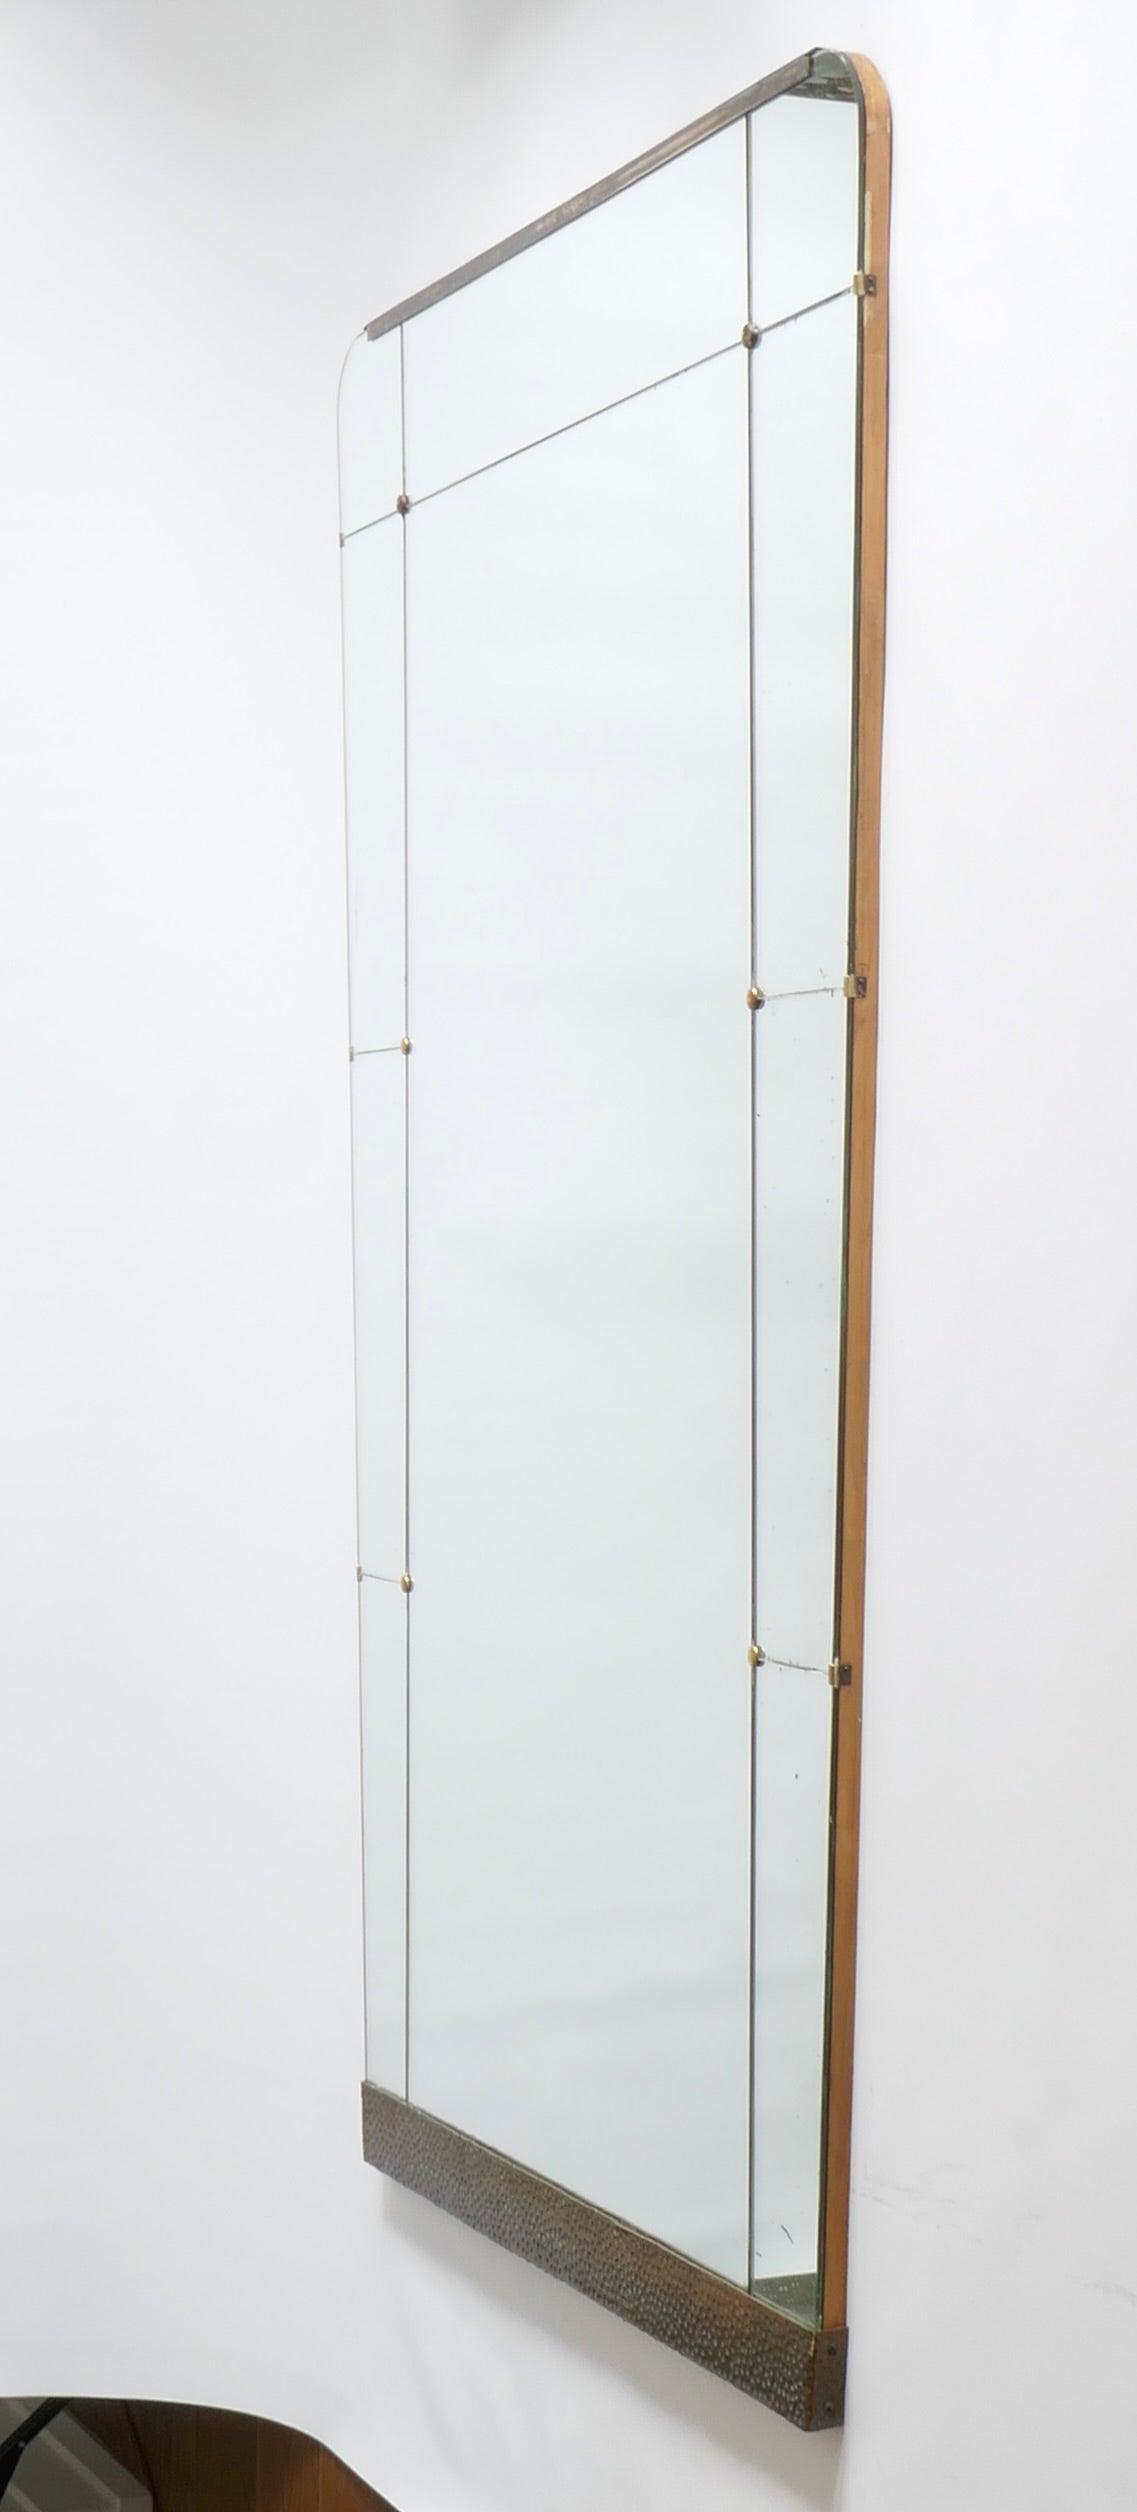 A very large wall mirror of tapering rectangular form, composed of one large central glass within a contour of smaller glass panels, the panels to each top corner gently rounded. Embellished with a hammered brass element to the base and a polished